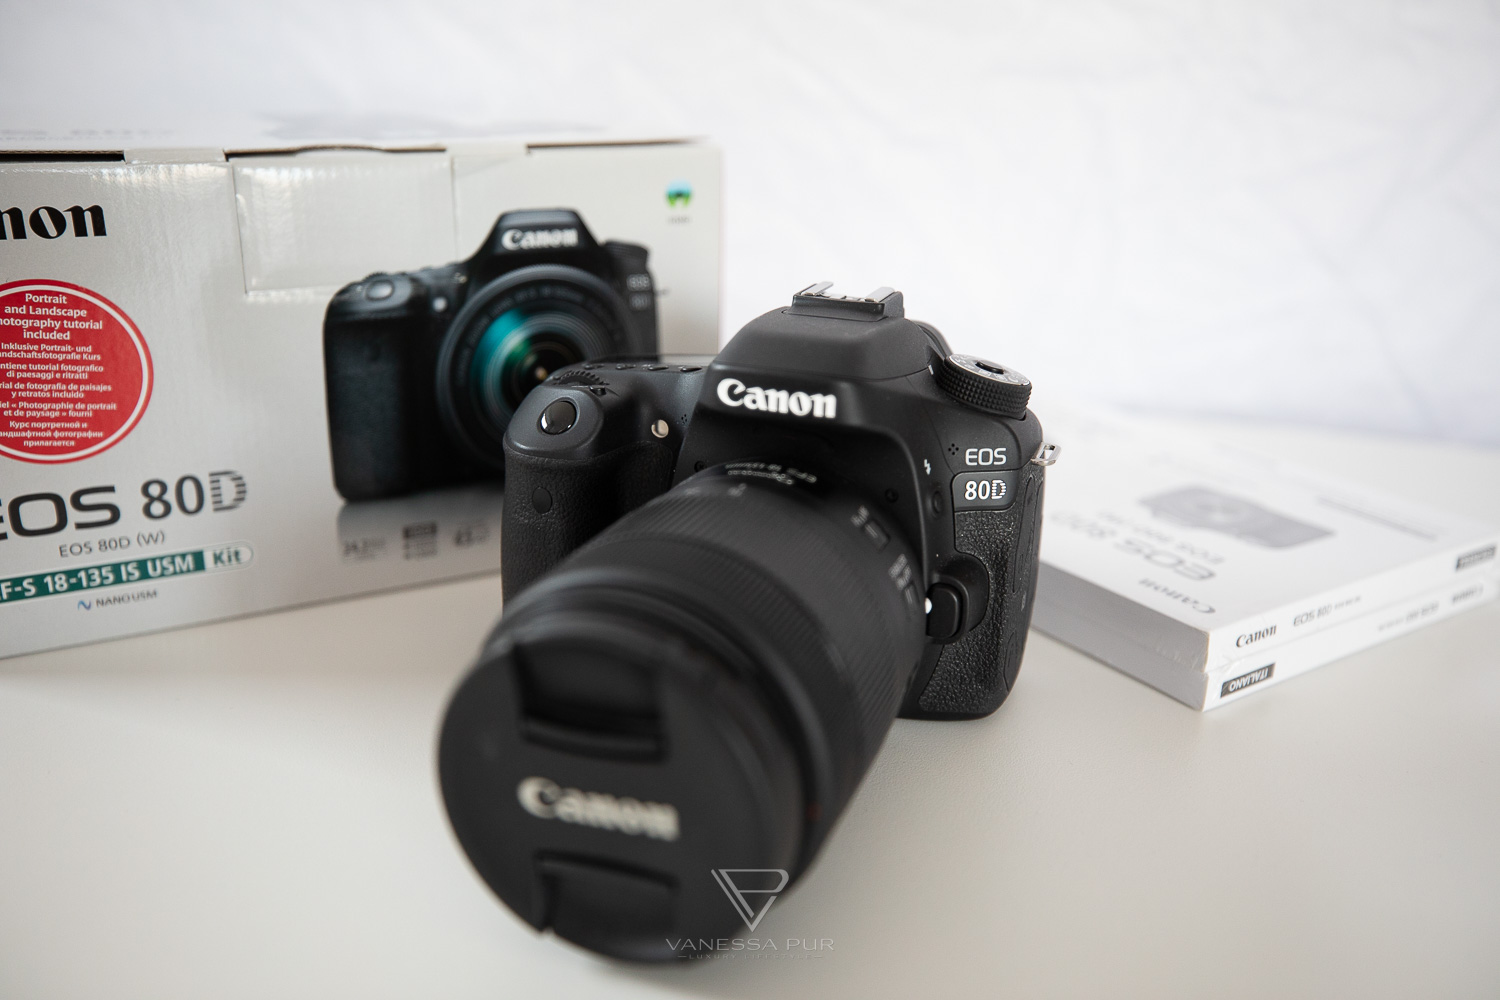 Canon 80D DSLR camera - new upper middle class from CANON - Canon EOS 80D - Camera - Lens 18-135mm IS USM - 3.5-5.6 -Product test - Tech blog - Photo blogger - Lifestyle blogger -24 megapixels - 60fps